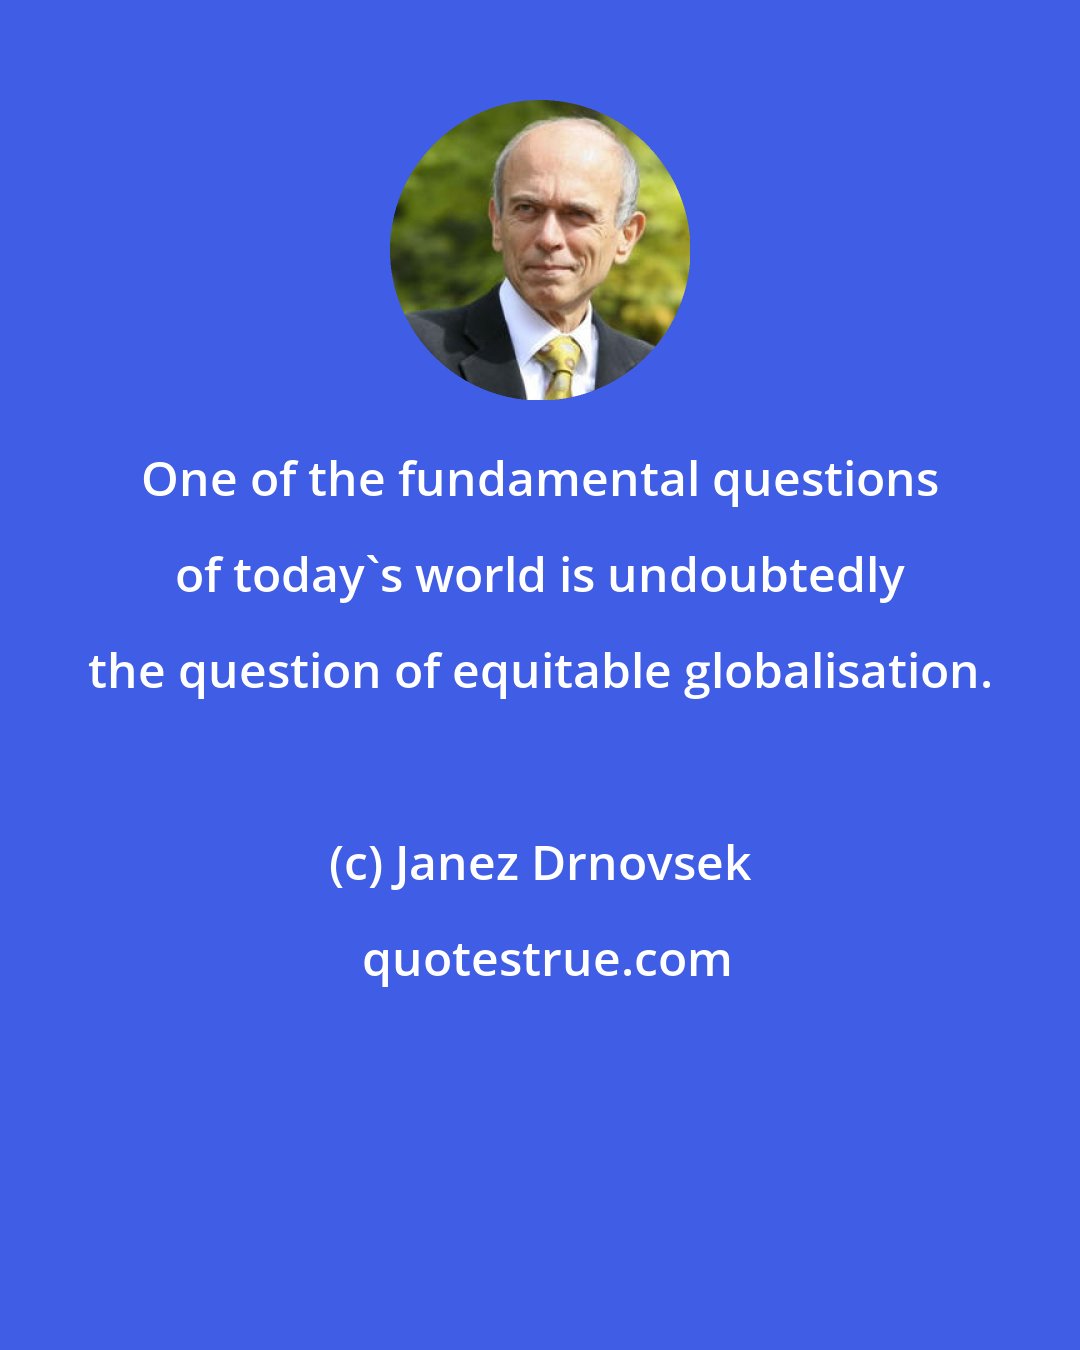 Janez Drnovsek: One of the fundamental questions of today's world is undoubtedly the question of equitable globalisation.